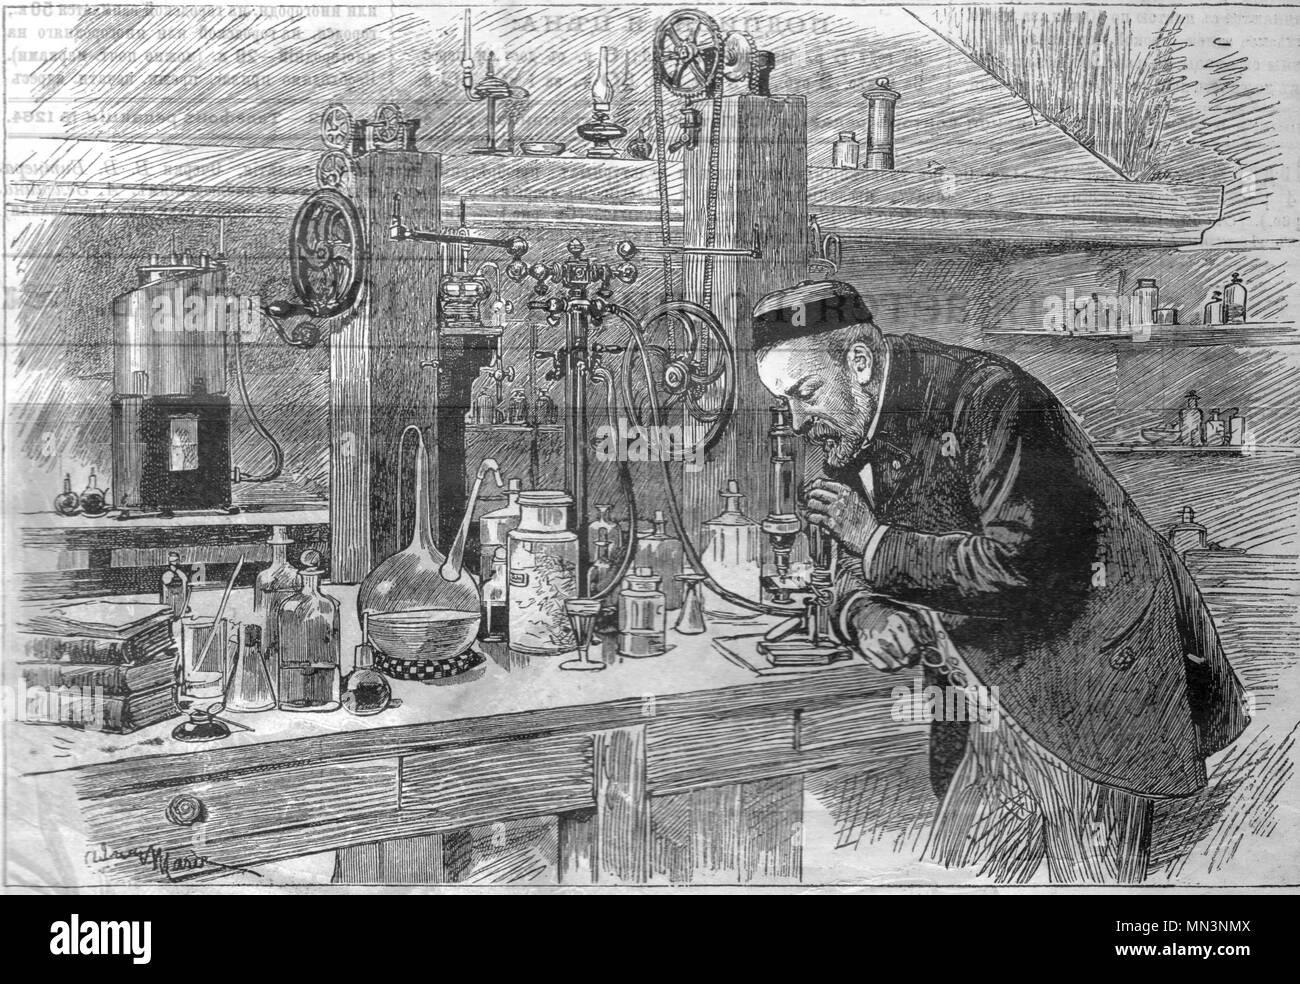 Louis Pasteur in his laboratory. Vintage engraved illustration. Published in magazine in 1900. Stock Photo